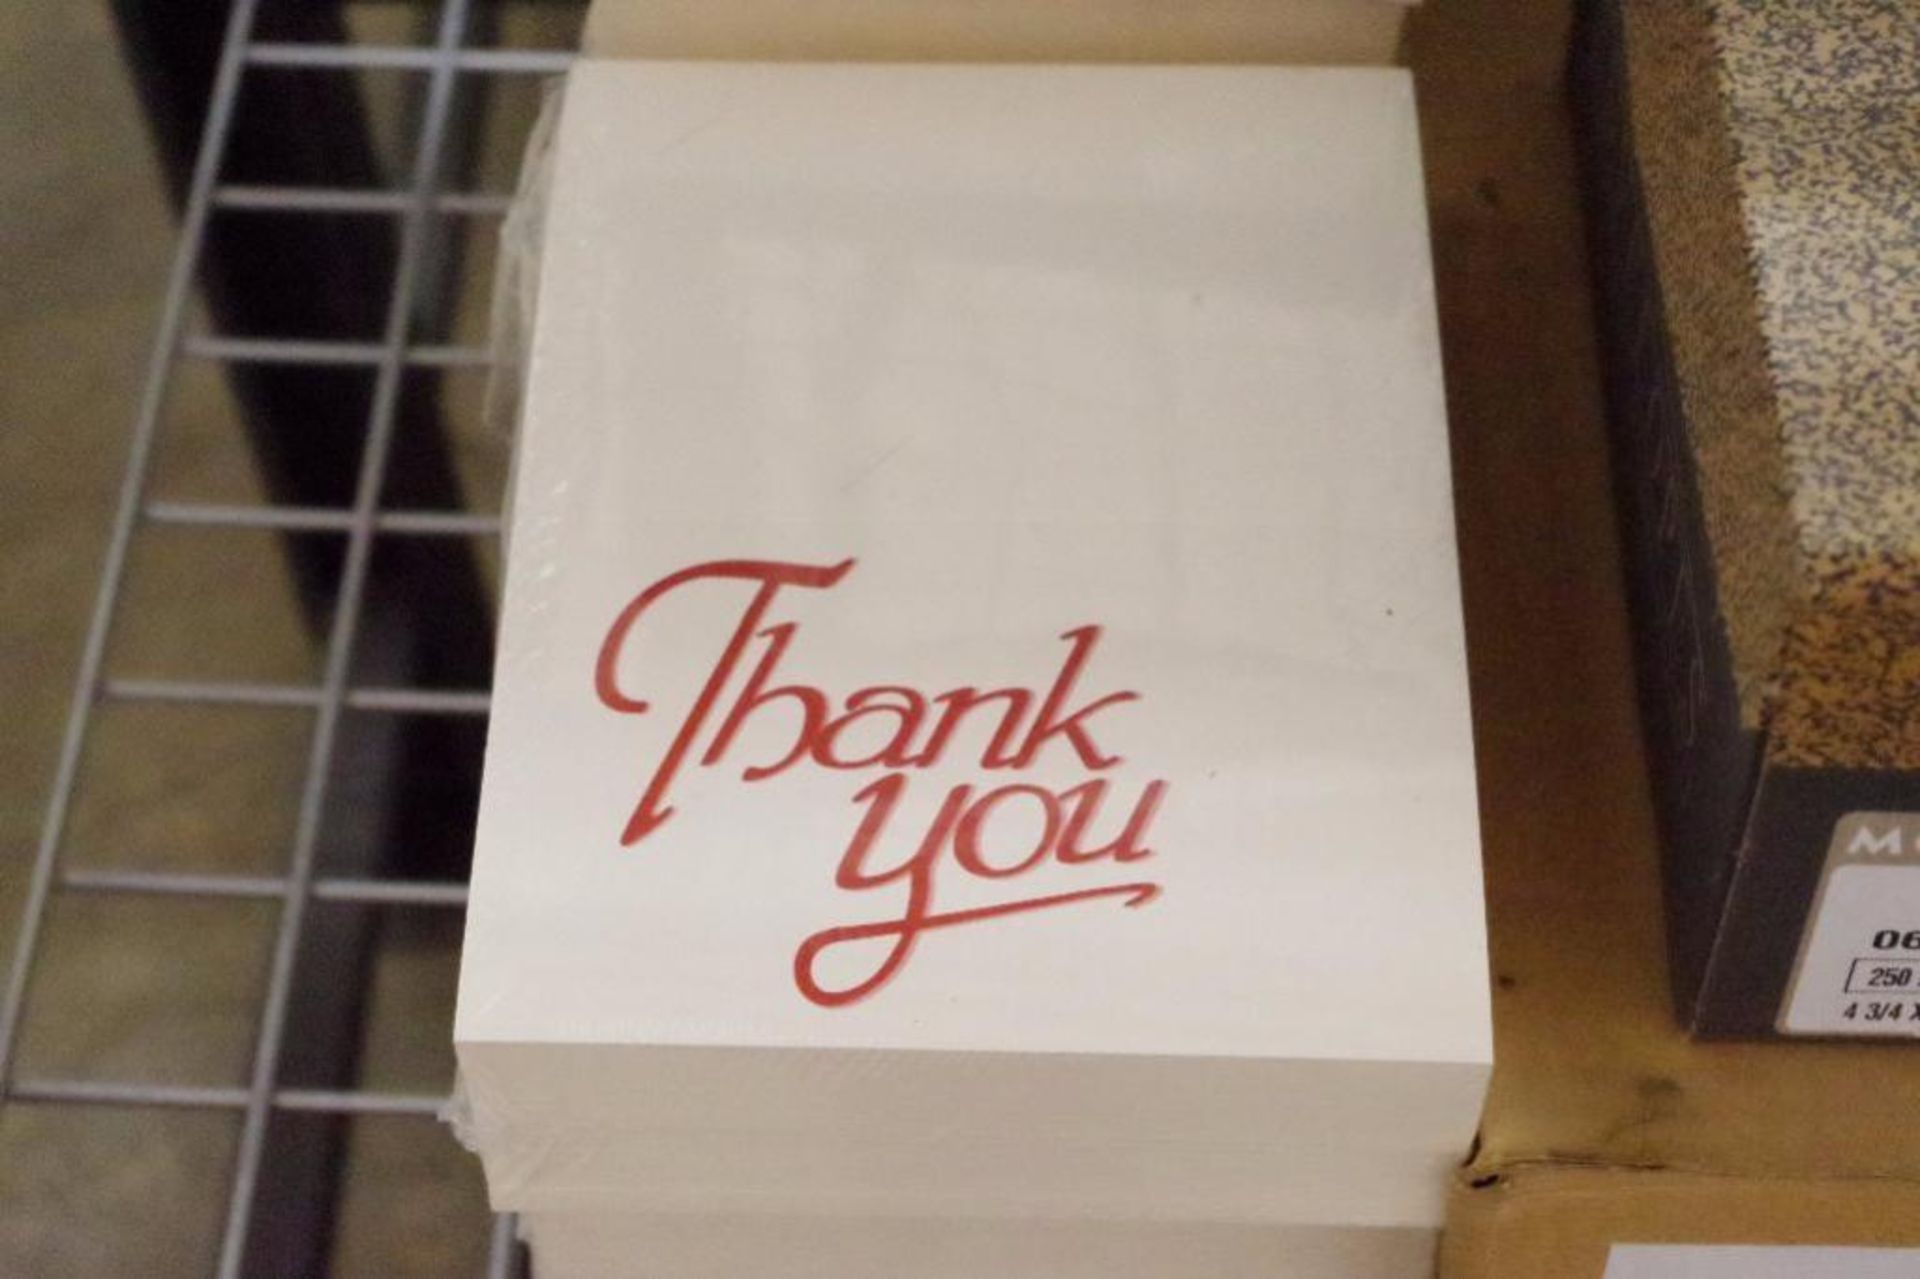 [QTY] Shelf Lot: (11250) Envelopes, (200) Sheets Avery Labels & (9) Packs "Thank You" Cards - Image 6 of 8